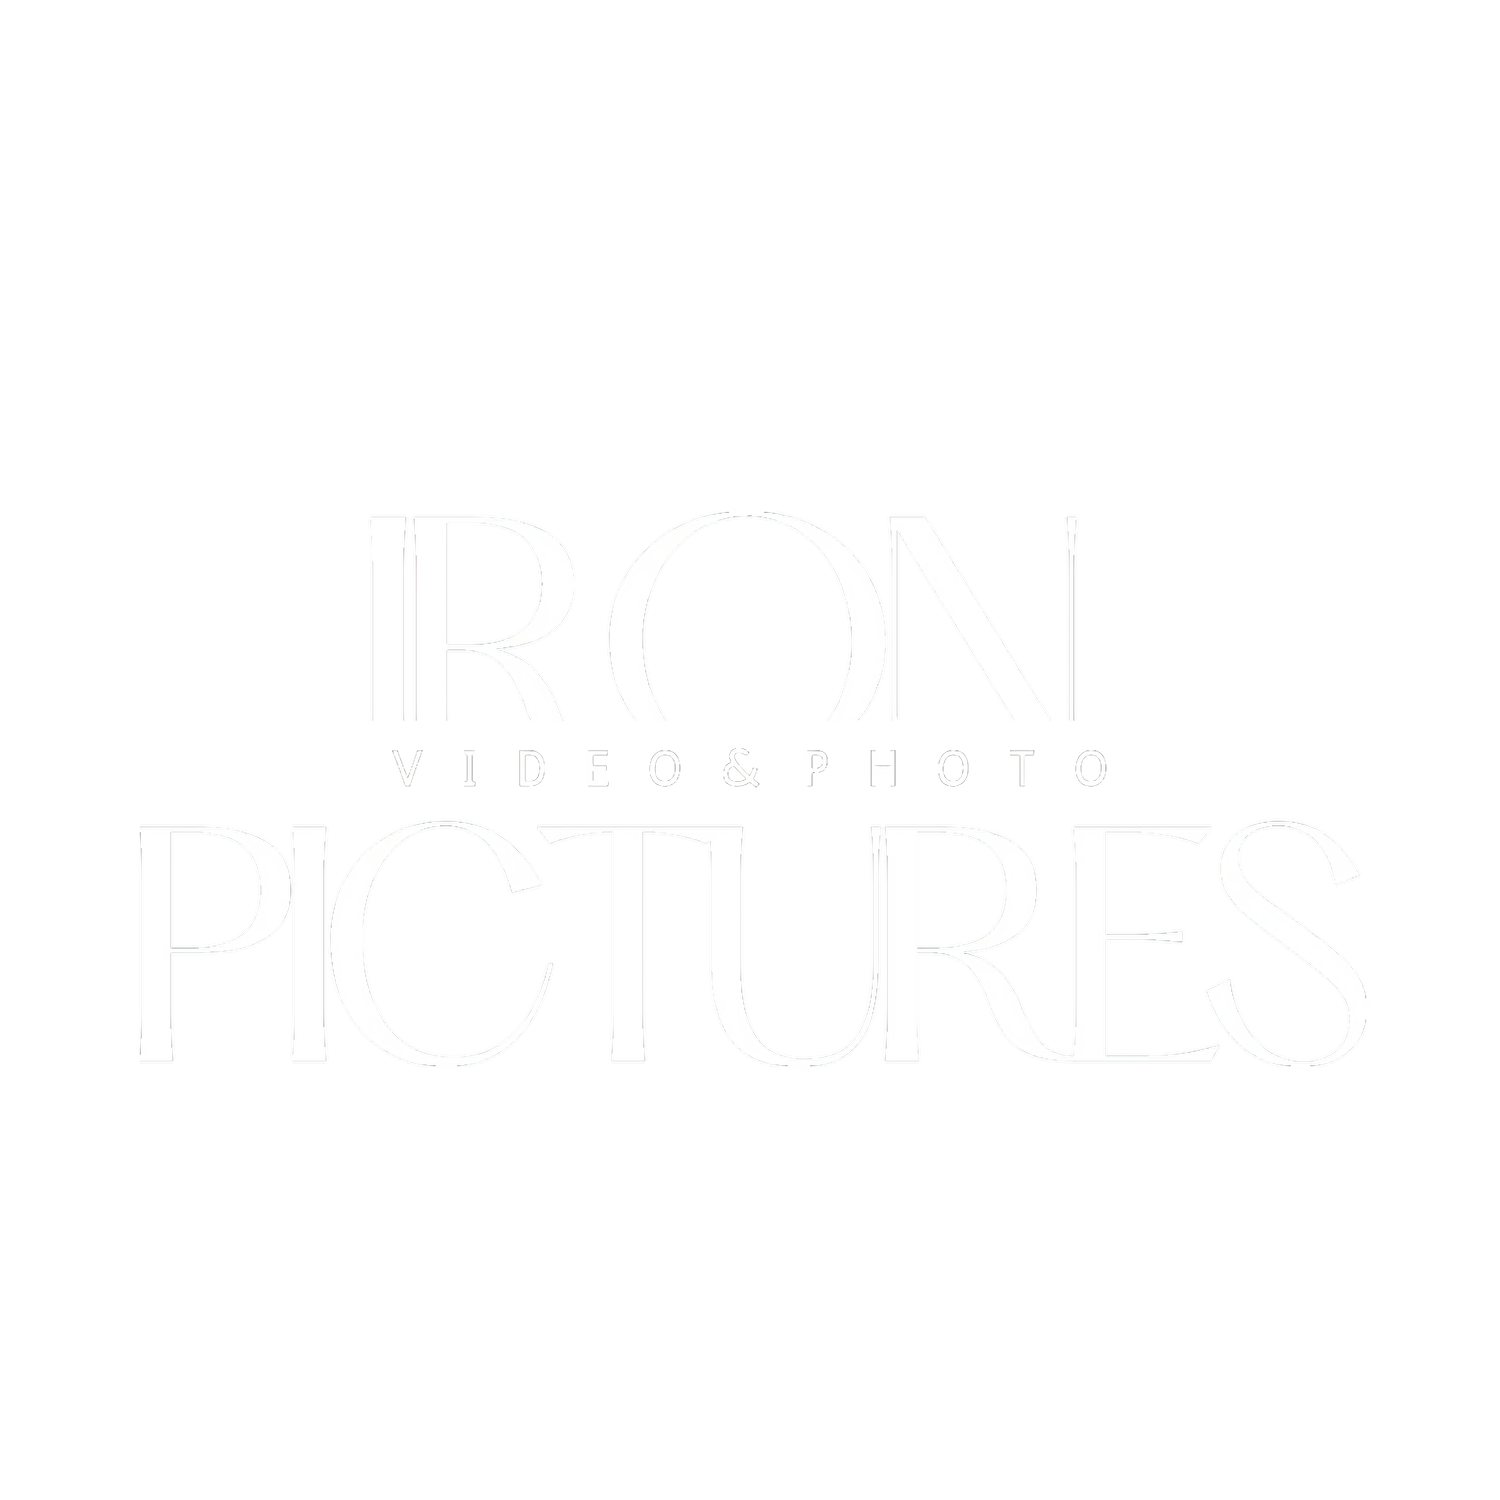 Iron Pictures